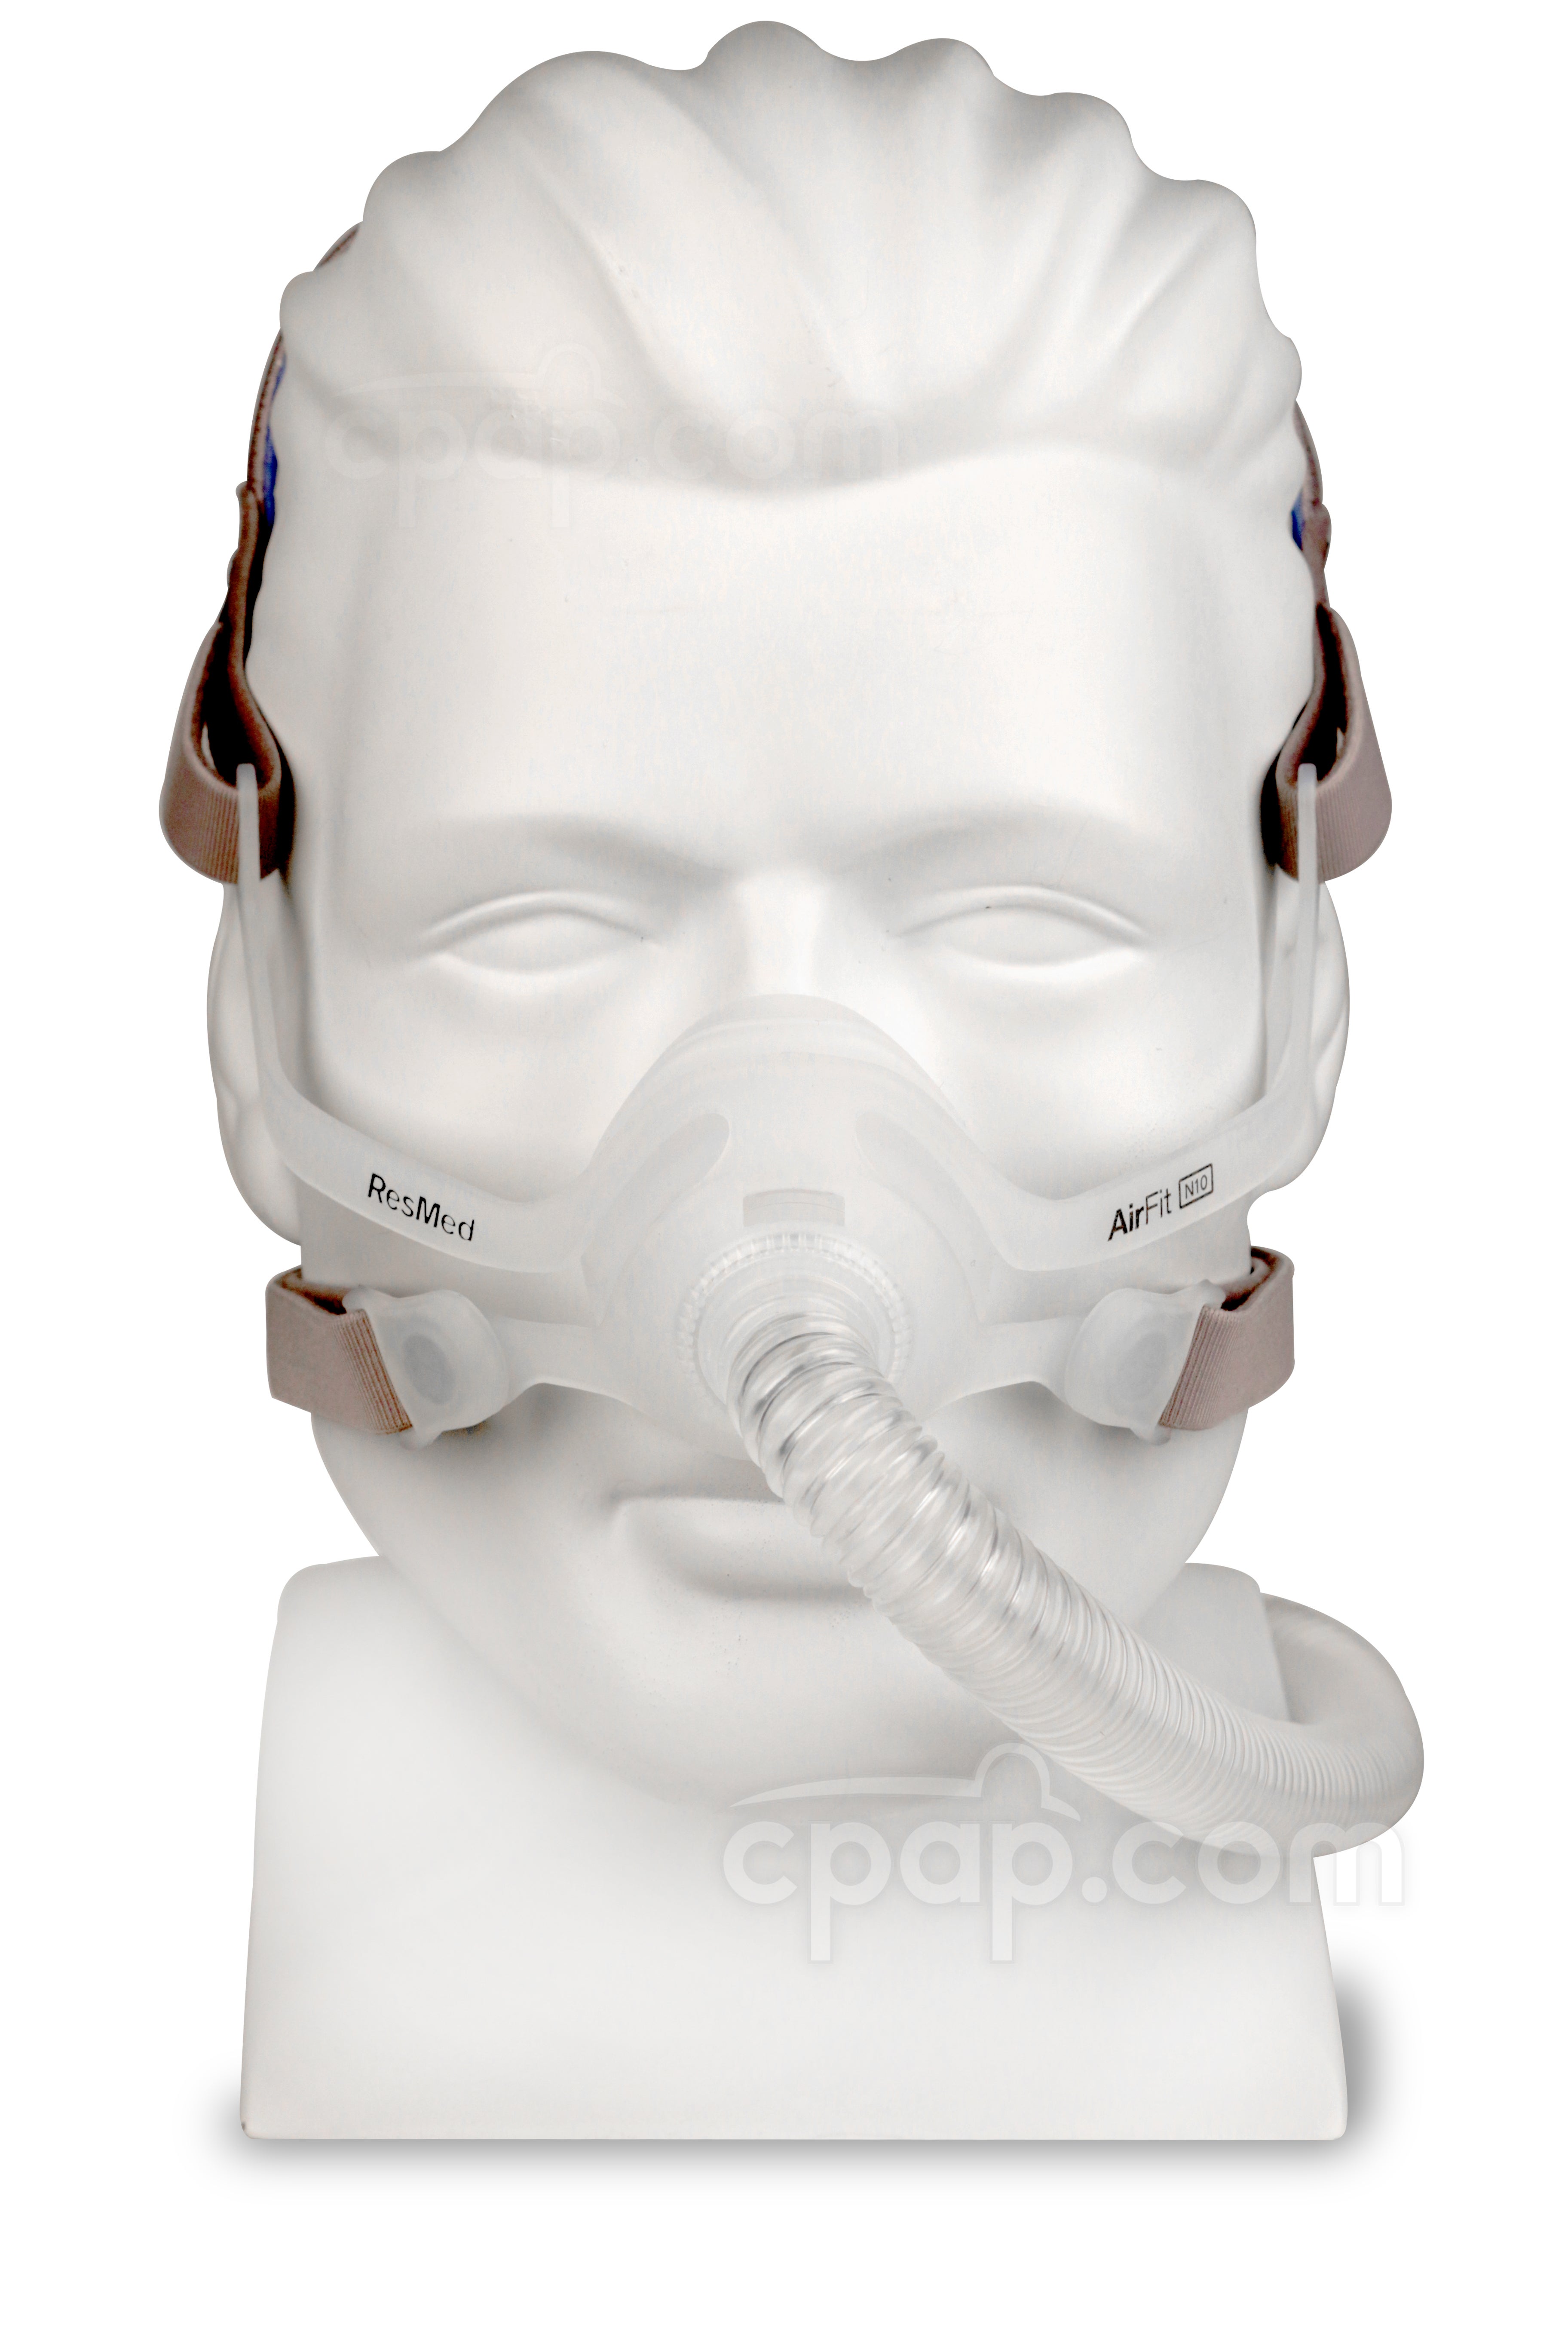 Resmed Airfit N10 Nasal Cpap Mask With Headgear 4711